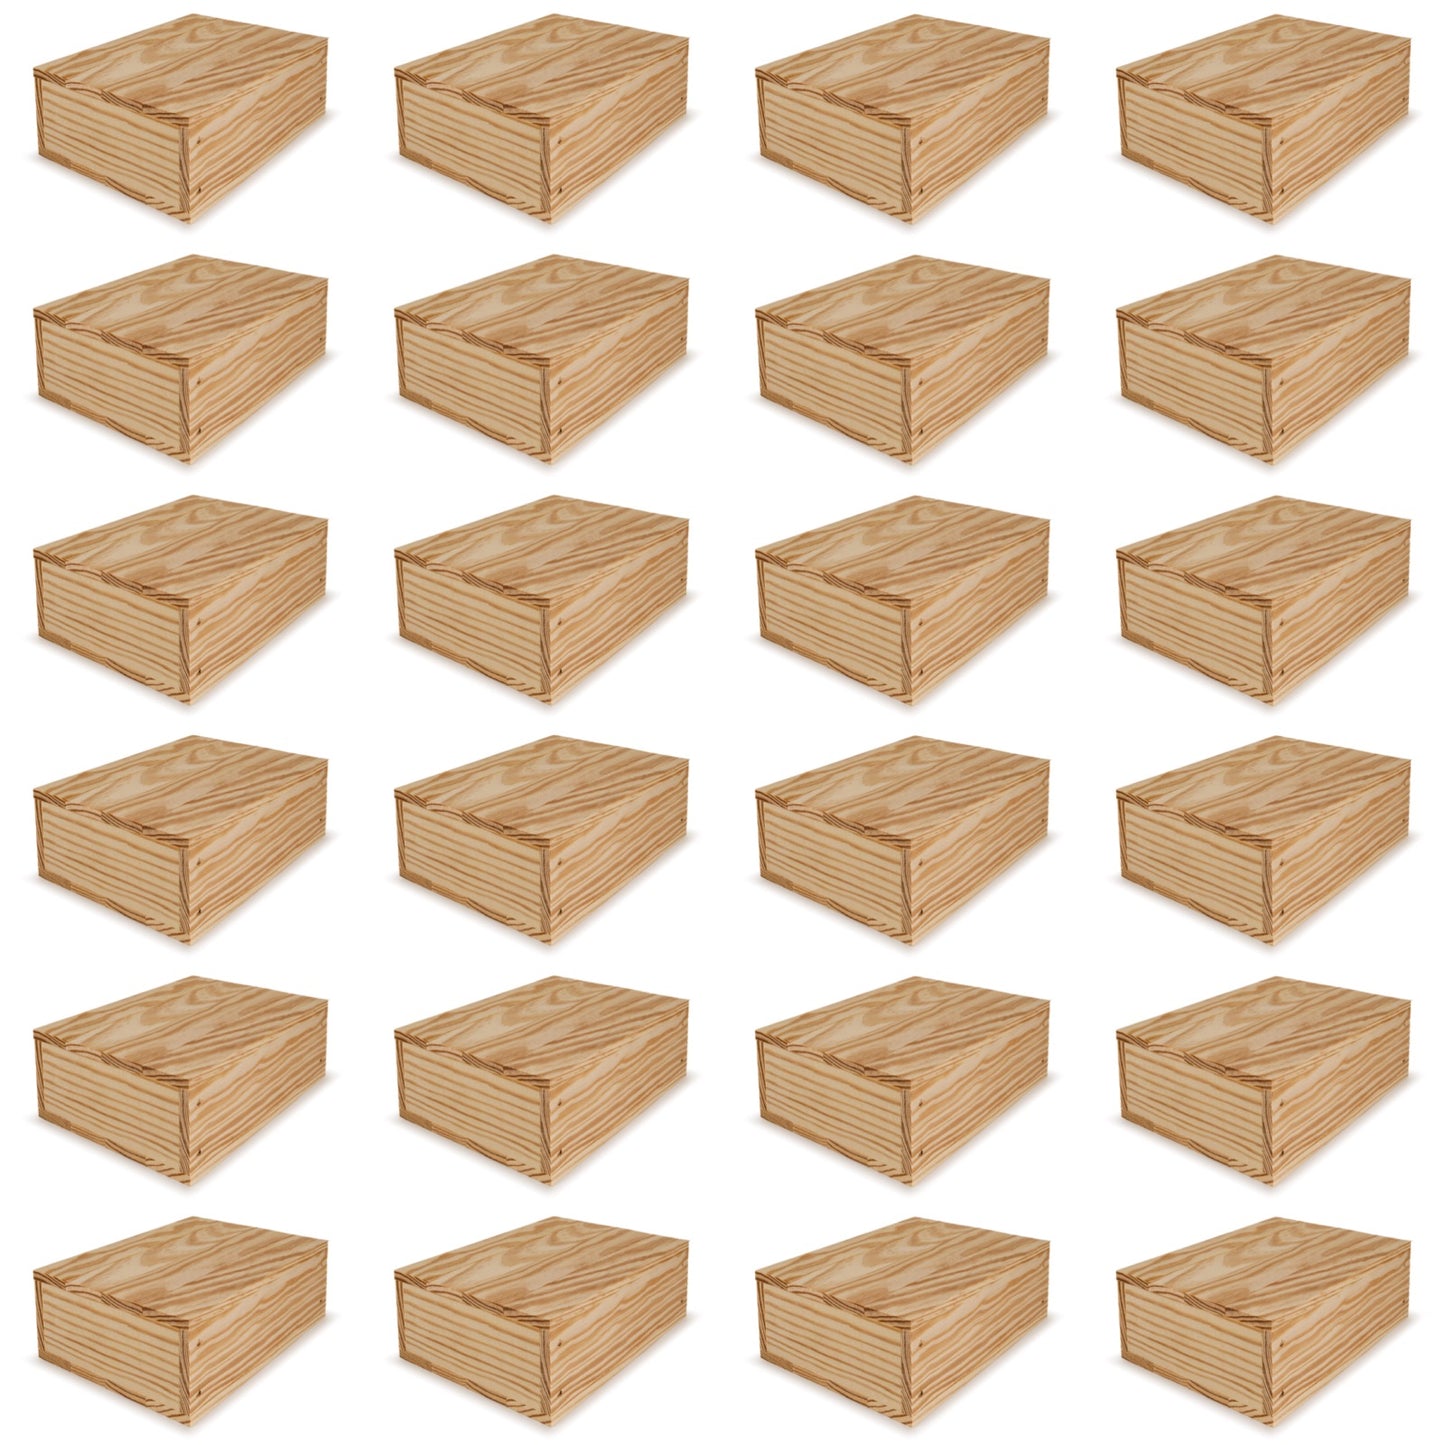 24 Small wooden crates with lid 8x6.25x2.75